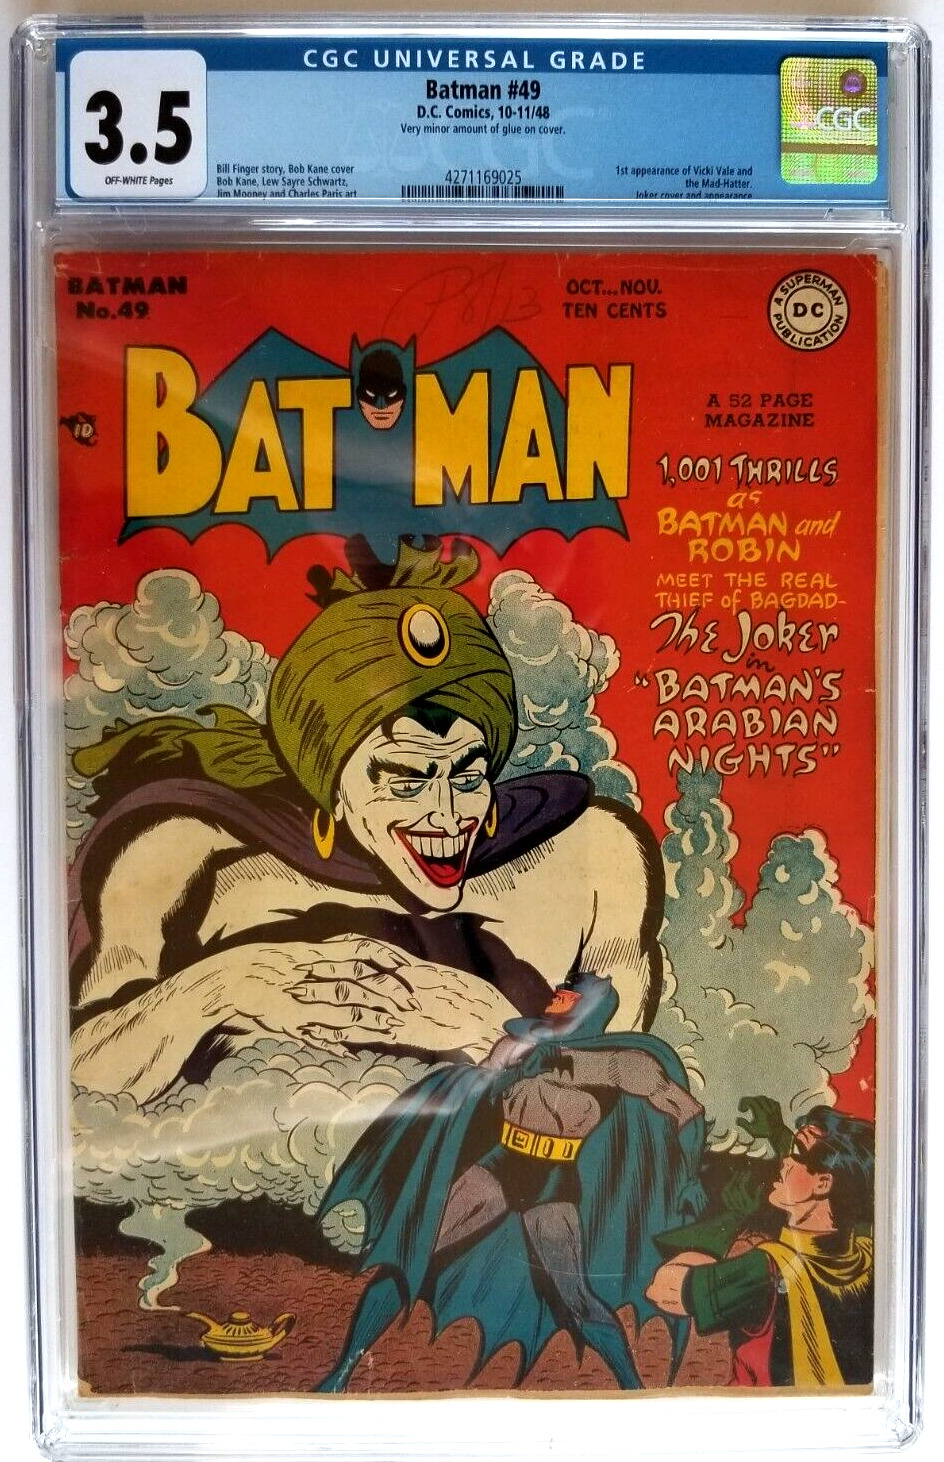 BATMAN #49 CGC VG- 3.5 DC 1948 1ST APPEARANCE OF VICKI VALE & THE MAD HATTER